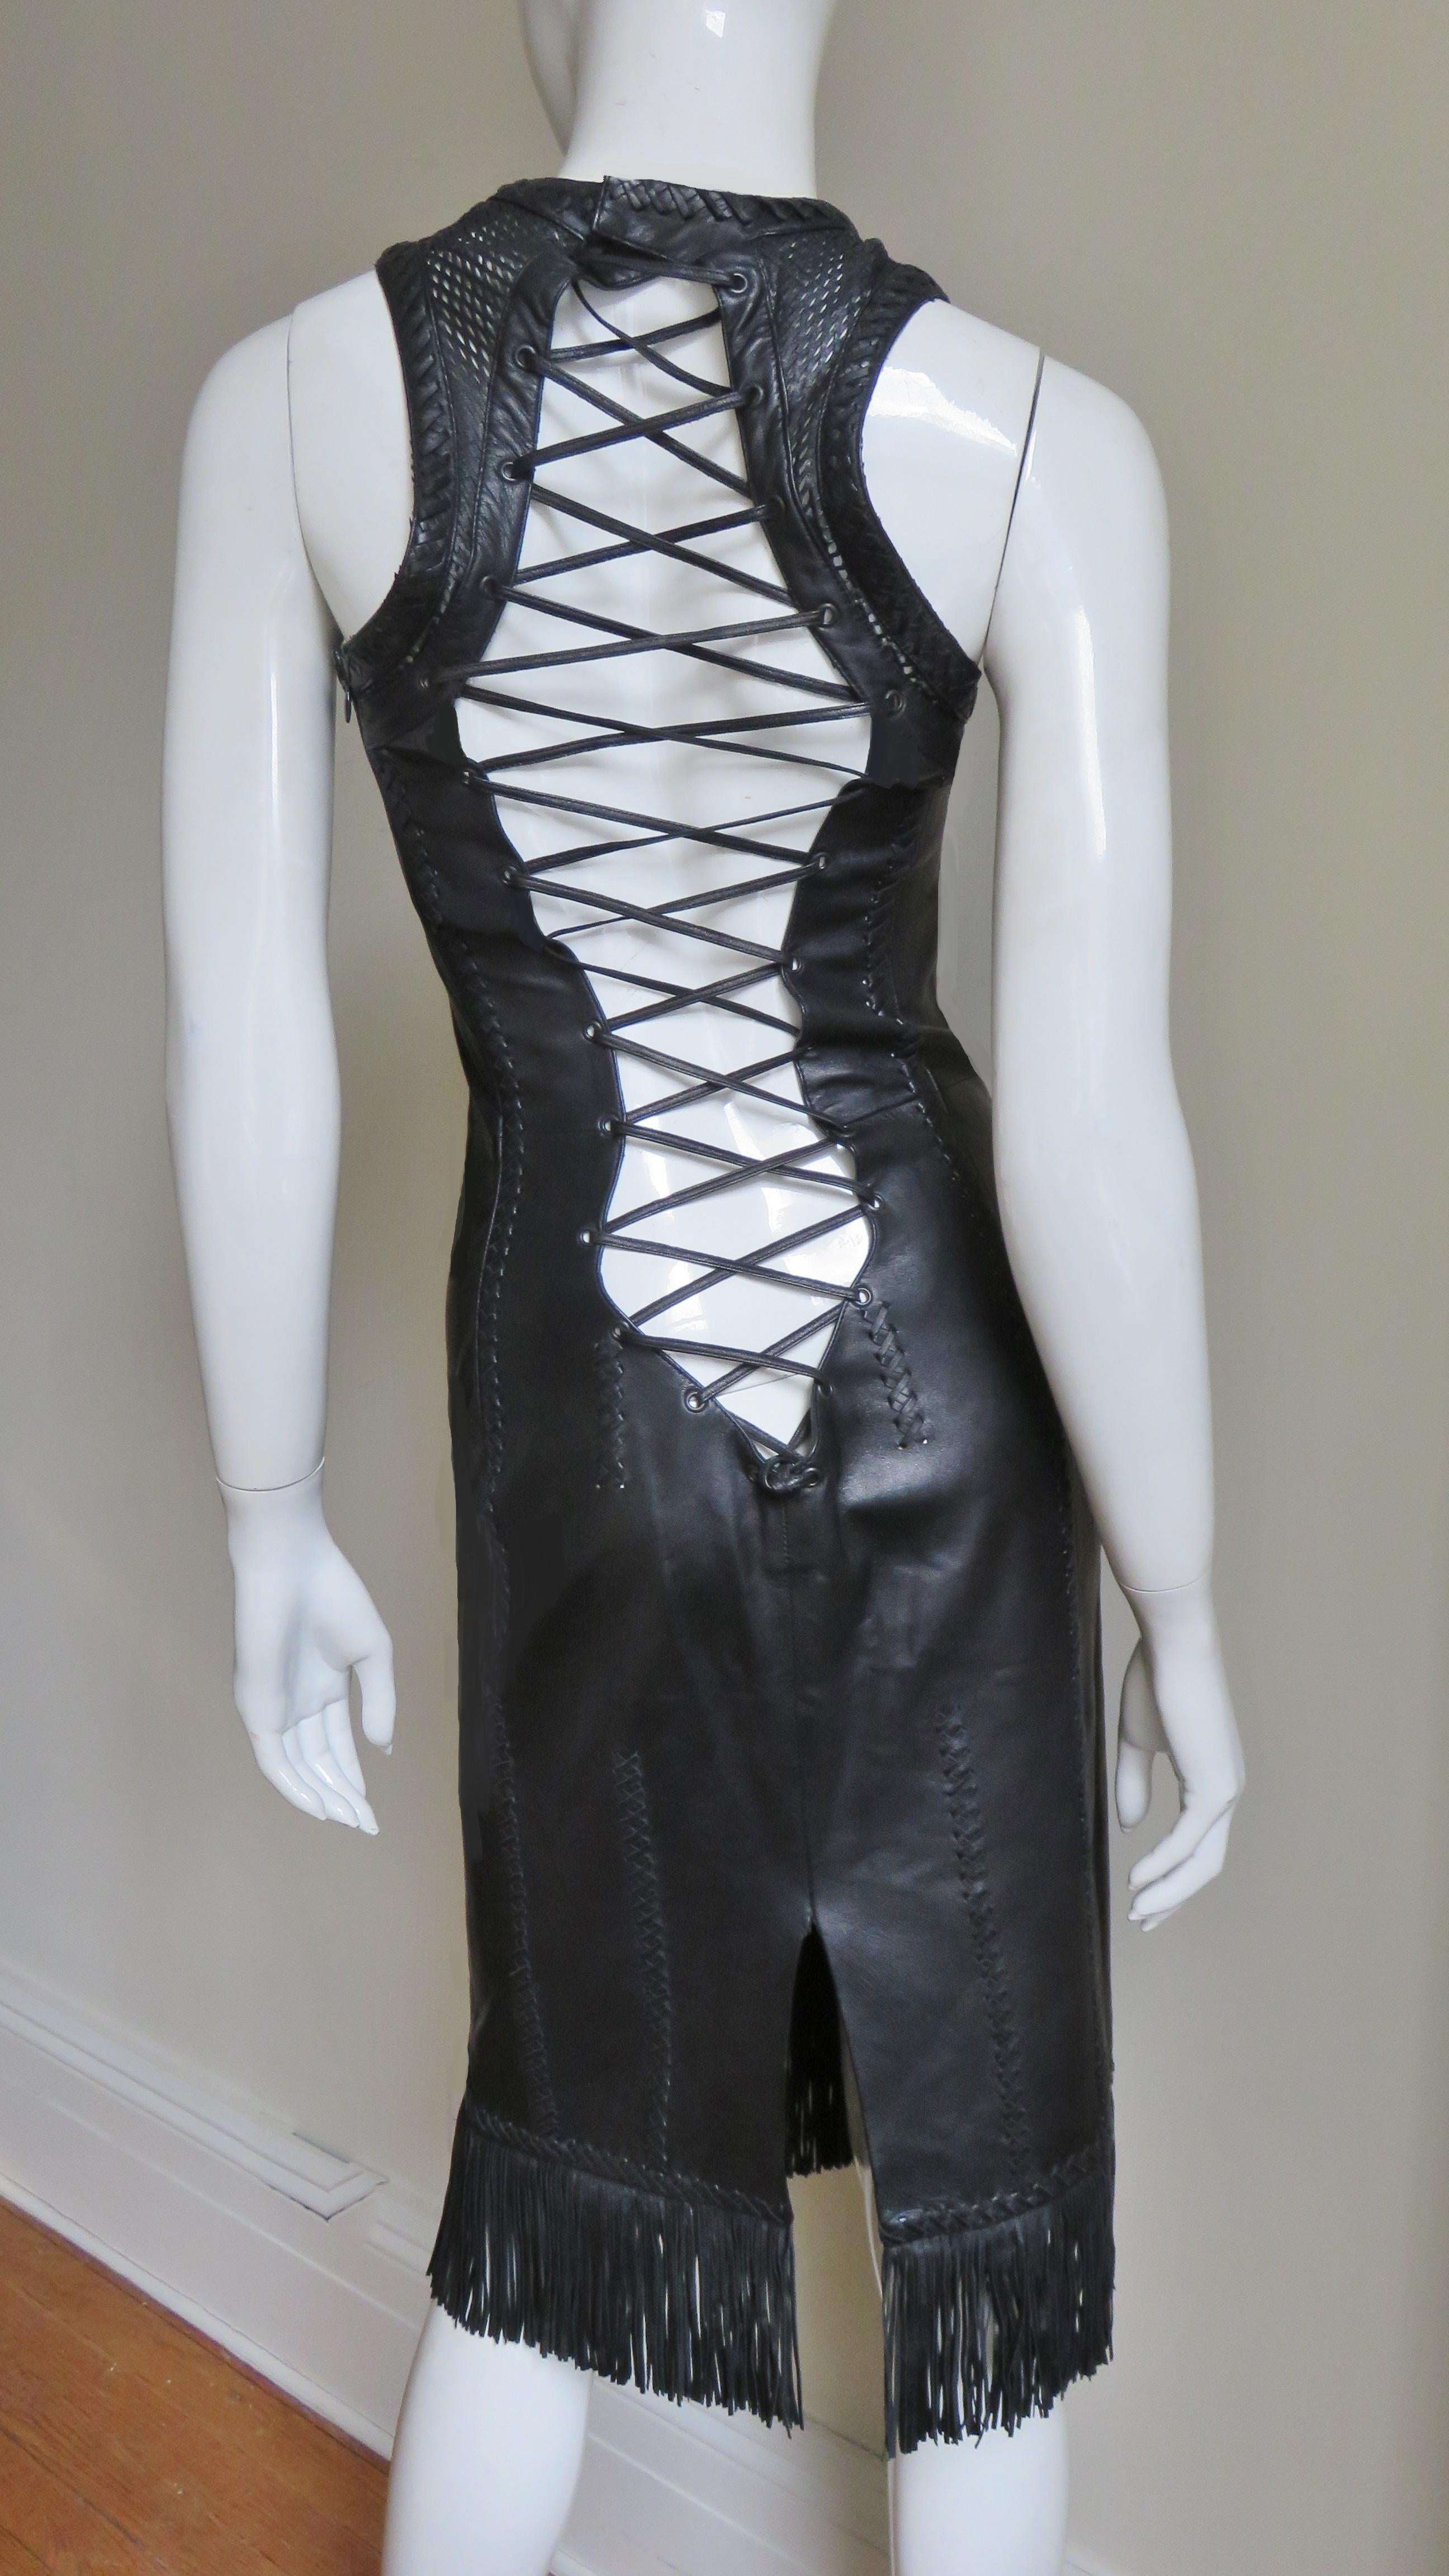  Gianni Versace Leather Lace up Dress S/S 2002 For Sale 6